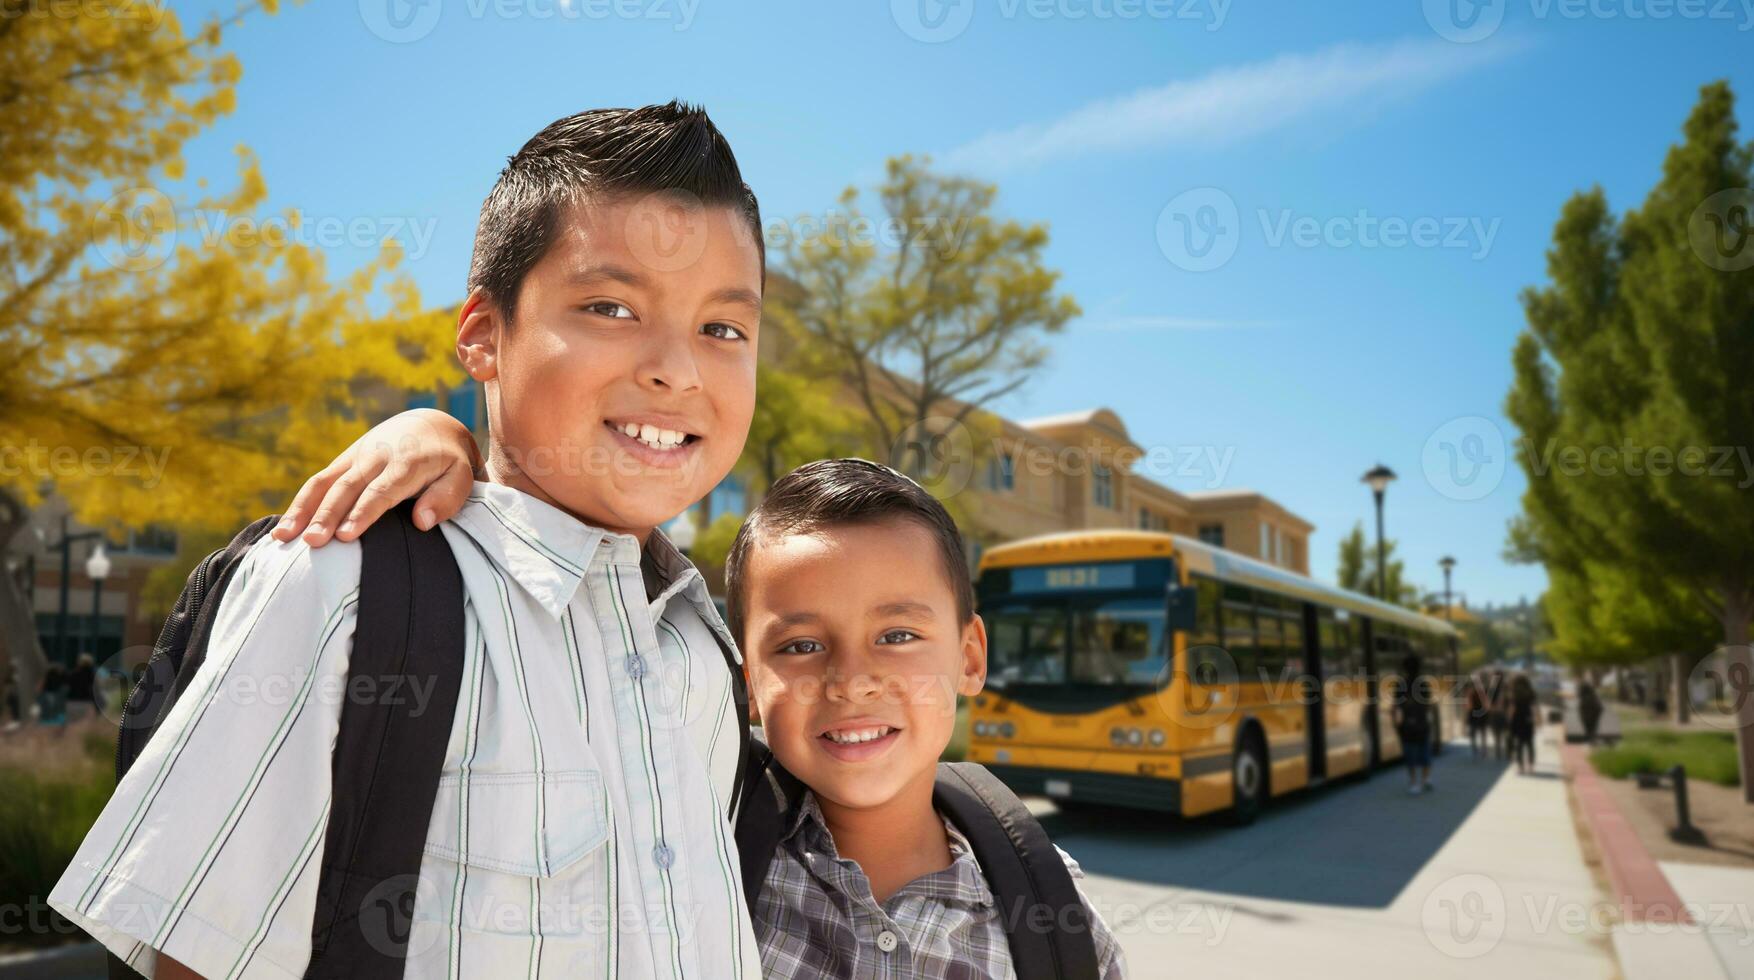 Two Happy Young Hispanic Brothers Wearing Backpacks Near a School Bus on Campus. photo